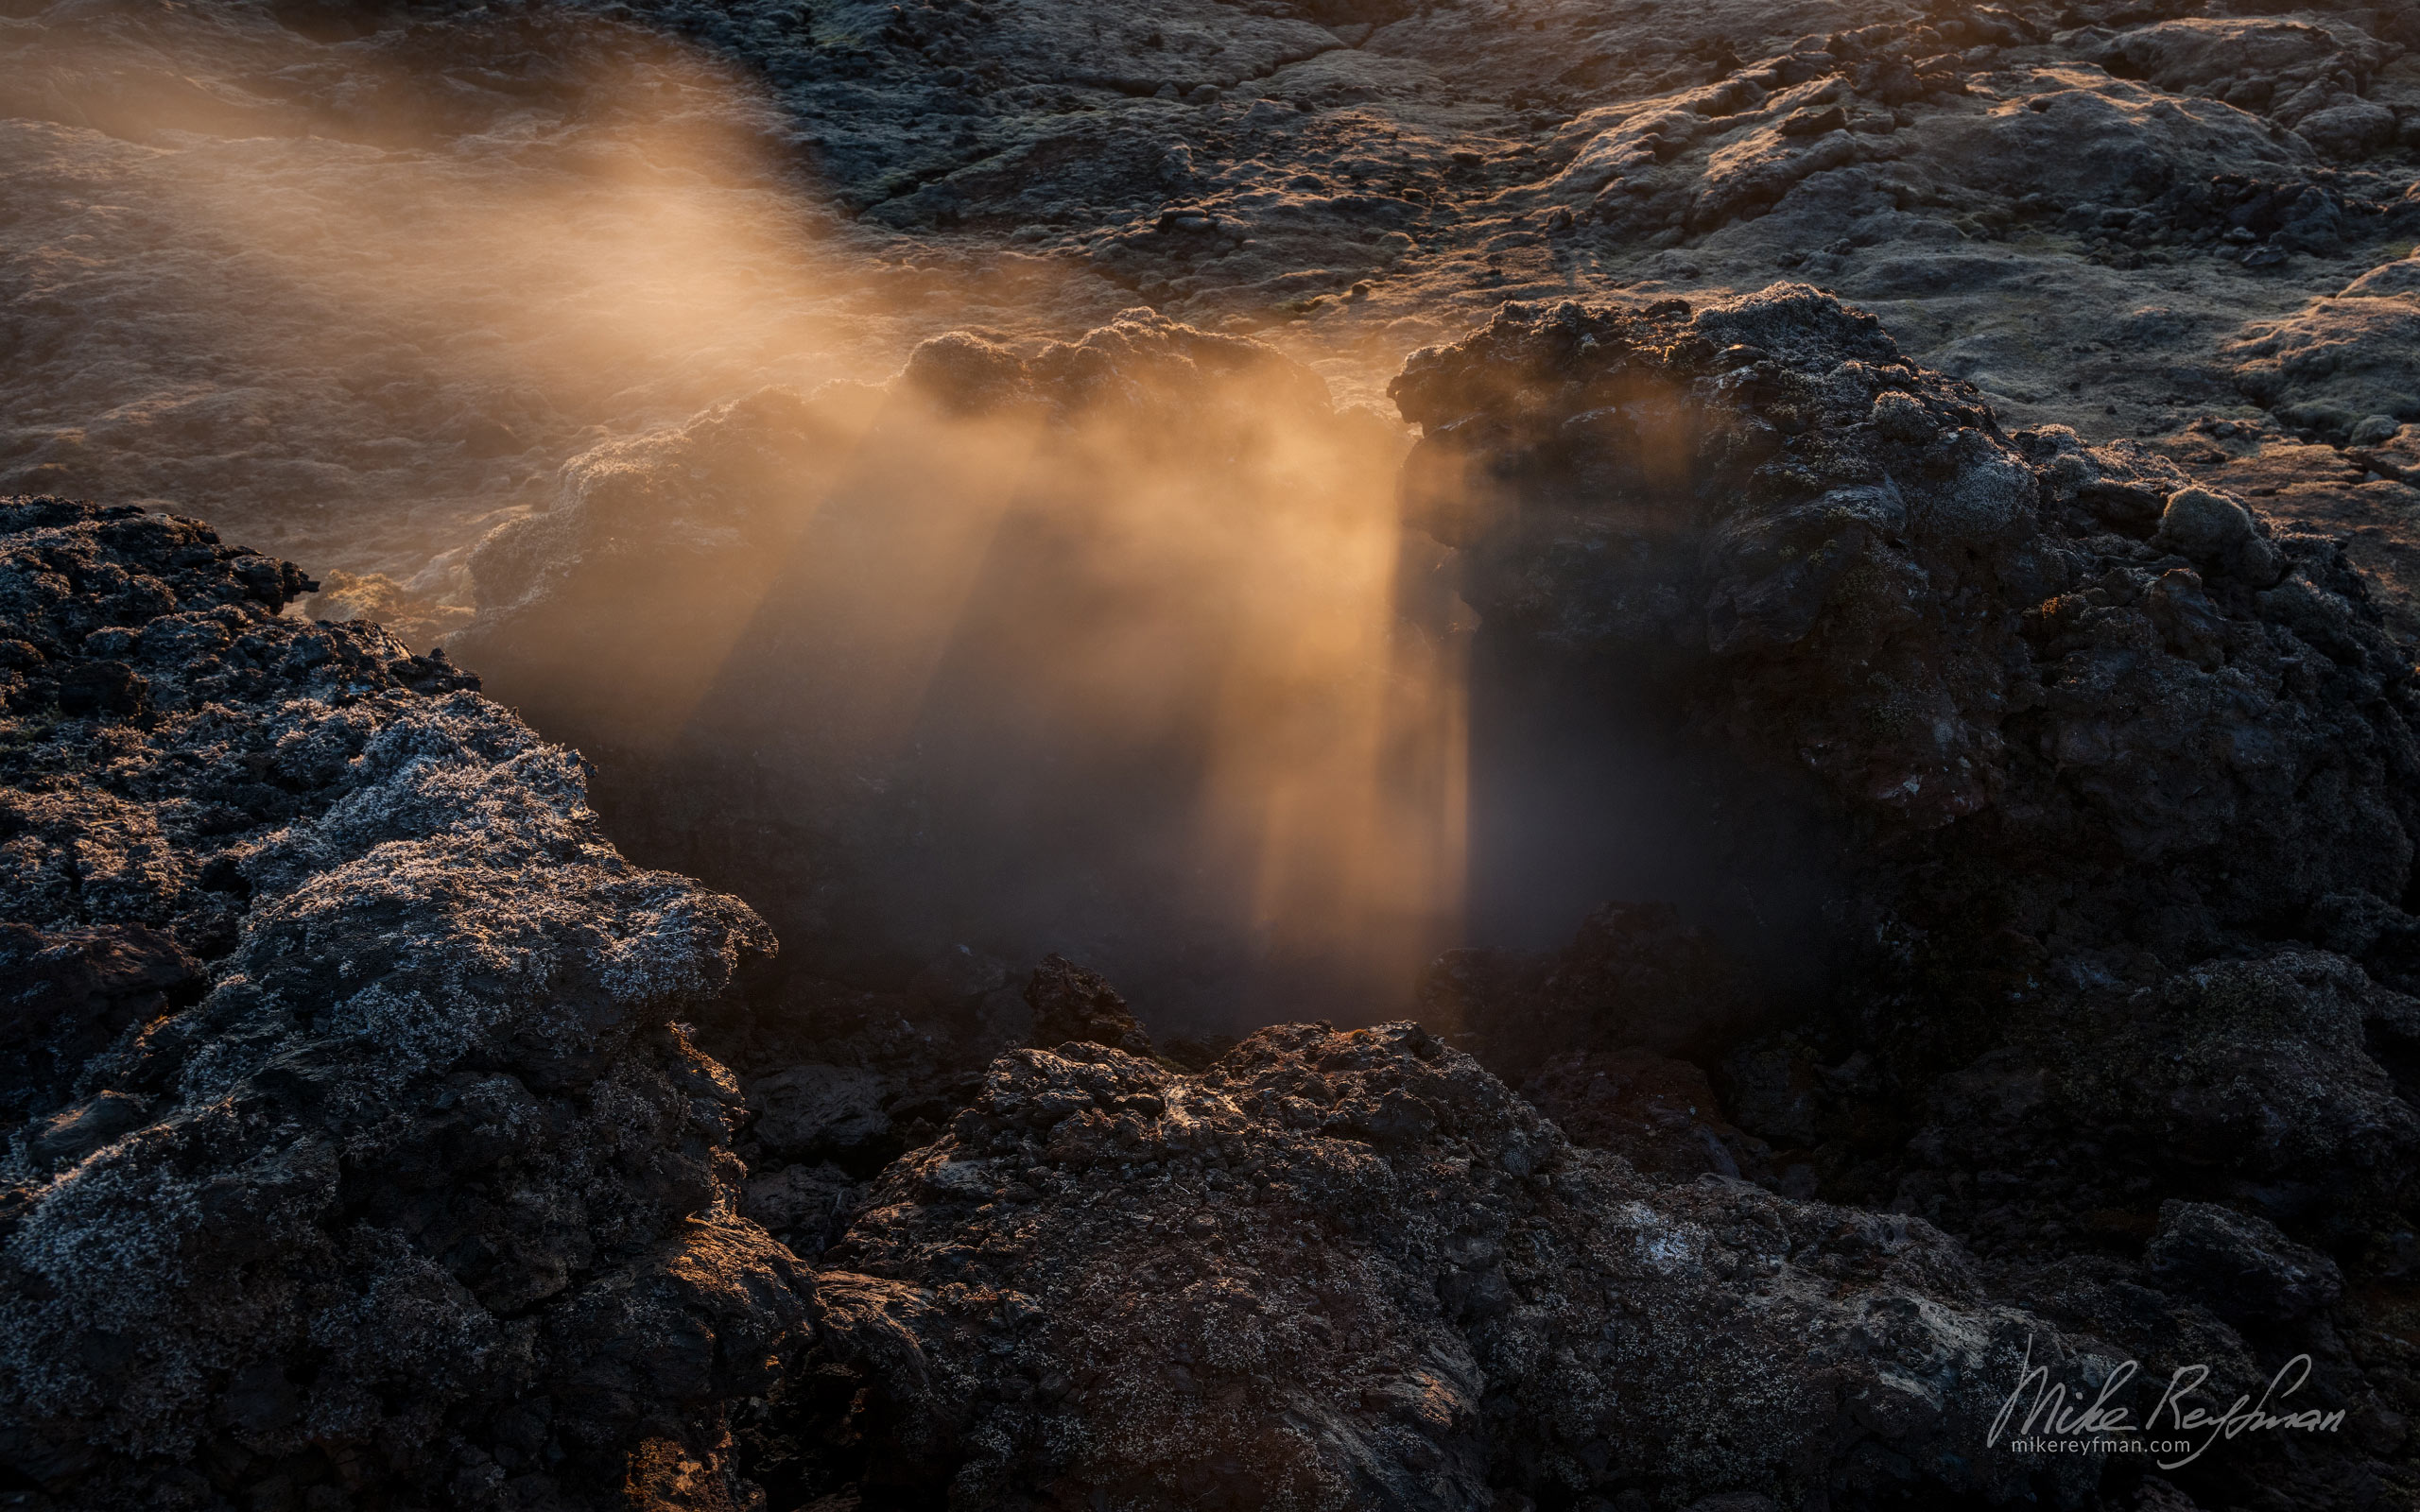 The Leirhnjúkur geothermal area - part of Krafla lava fields. Myvatn, Iceland. 103-IC-GP _M3X4742 - Rhyolite Mountains, Crater Lakes, Geothermal Areas, Lava Fields and Glacial Rivers. Iceland.  - Mike Reyfman Photography